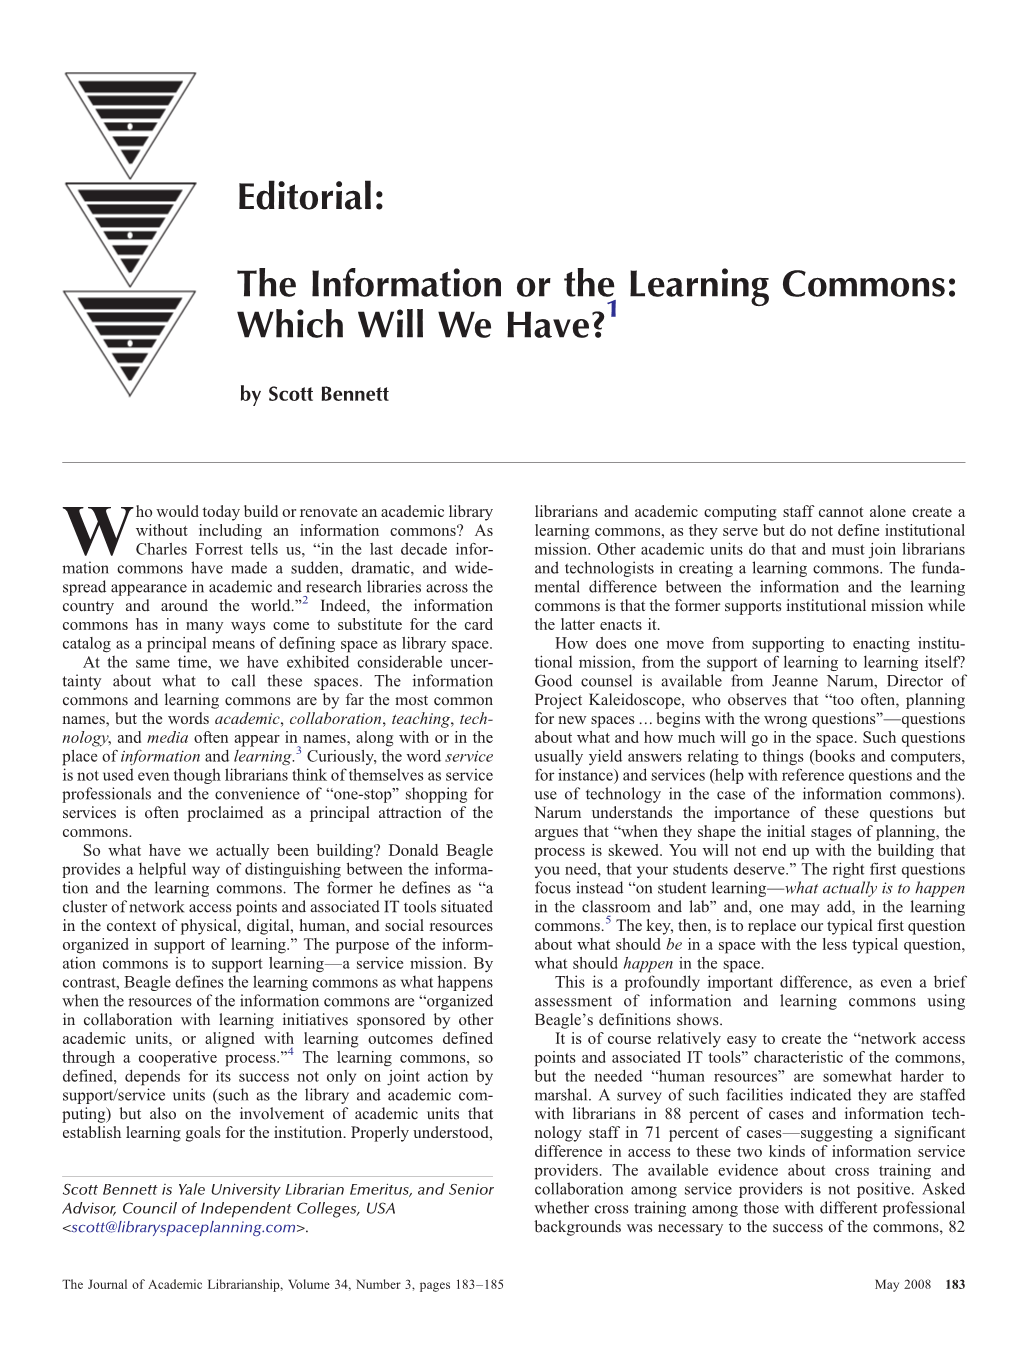 The Information Or the Learning Commons: Which Will We Have?1